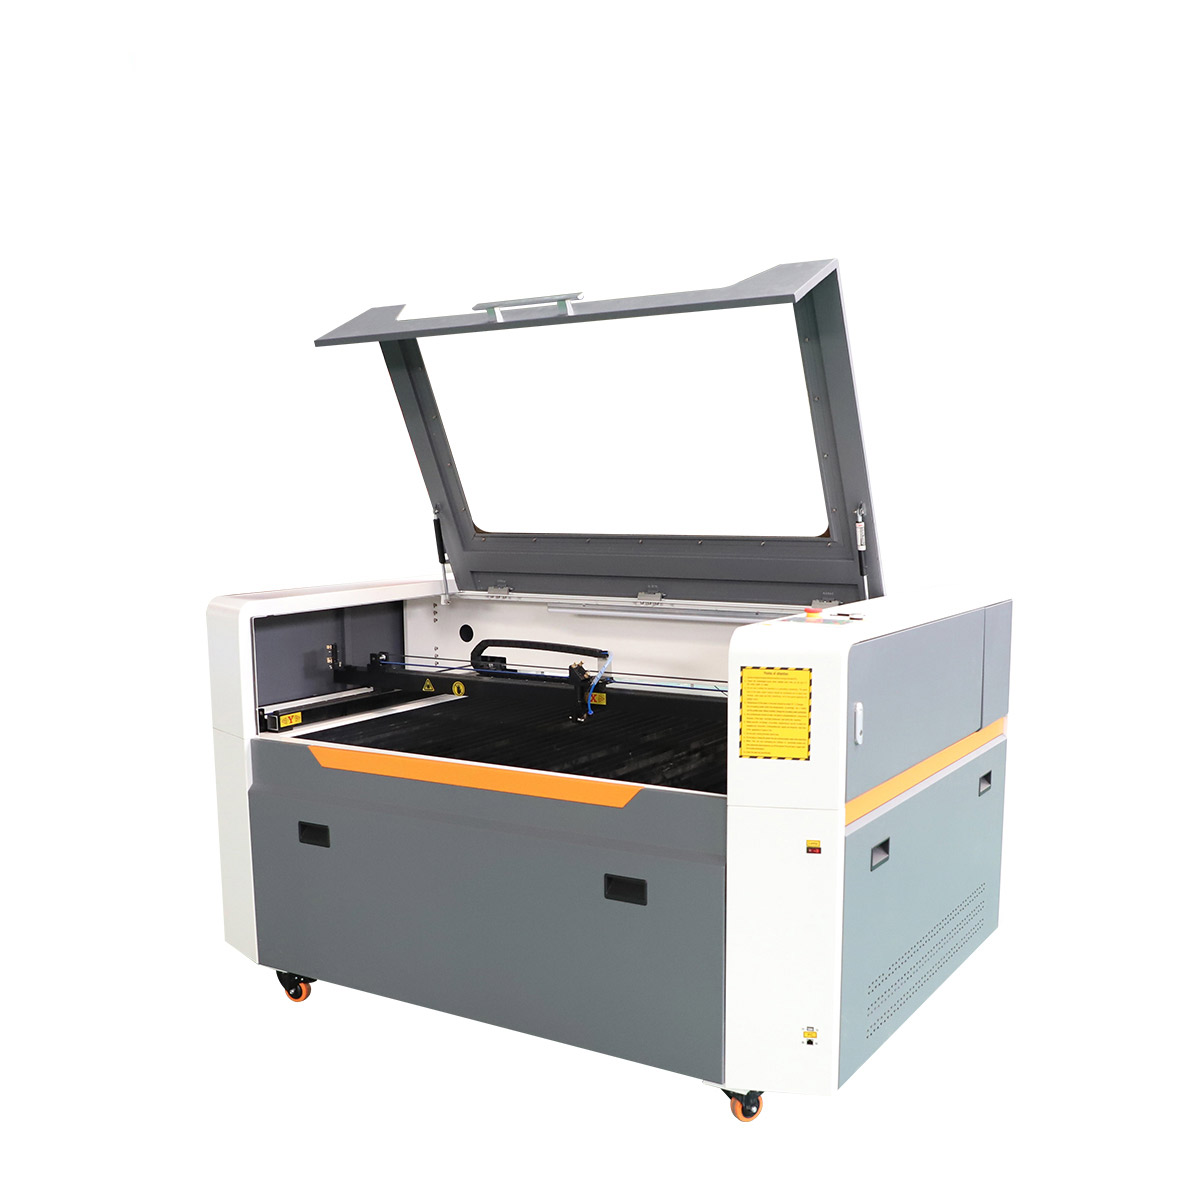 MC 1390 Laser Cutting Machine for Acrylic, Crytal, Leather, MDF, Paper, Plastic, Plywood